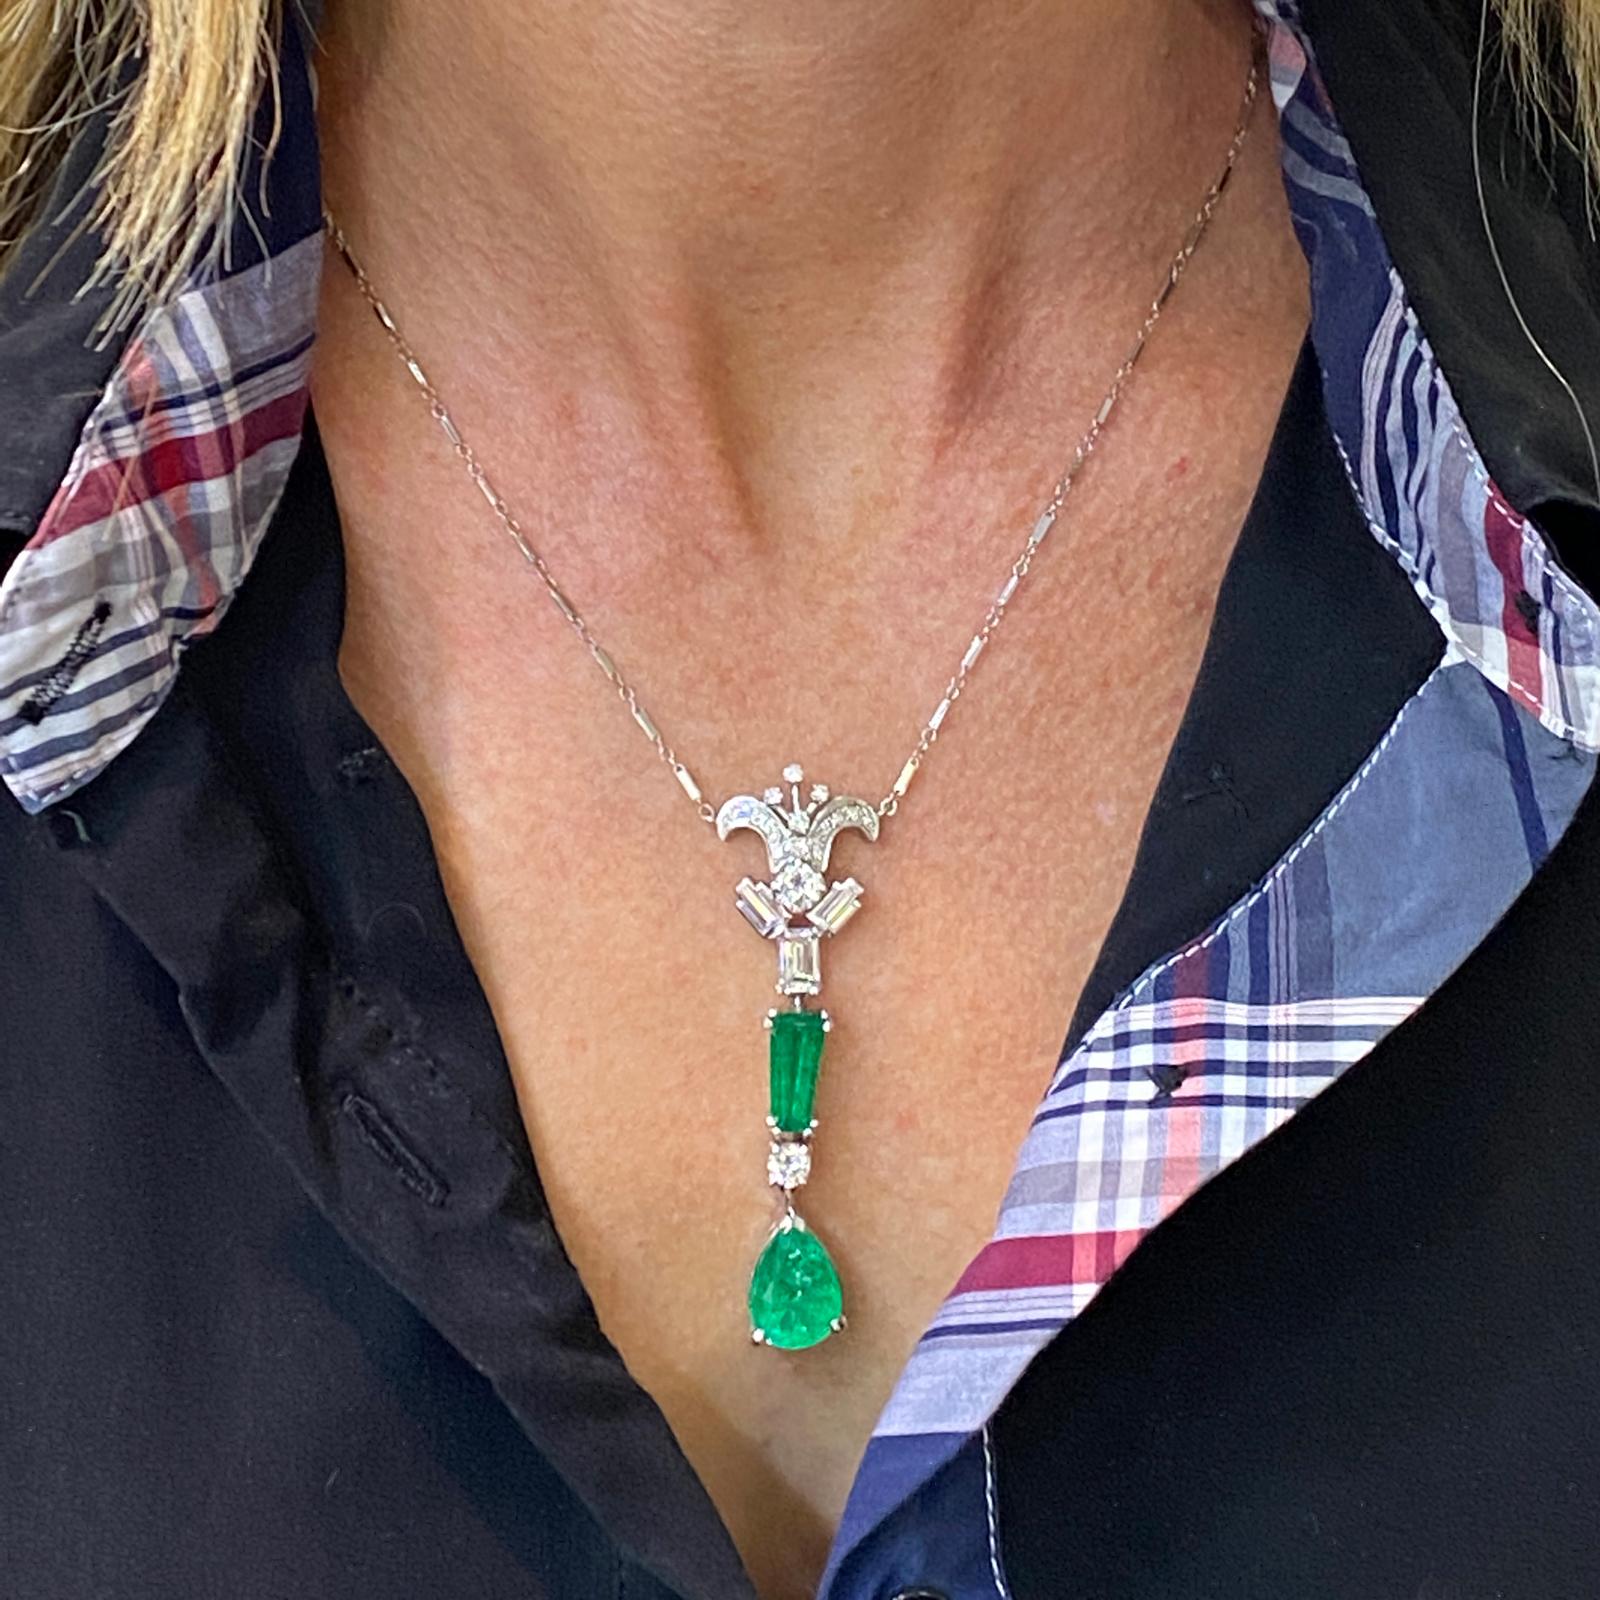 Gorgeous Colombian Emerald Diamond Vintage Necklace fashioned in 18 karat white gold. The drop pendant features 2 AGL certified Columbian emeralds. An approximately 6.50 carat pear shape and a 2.00 carat step cut modified briliant. The emerald is of